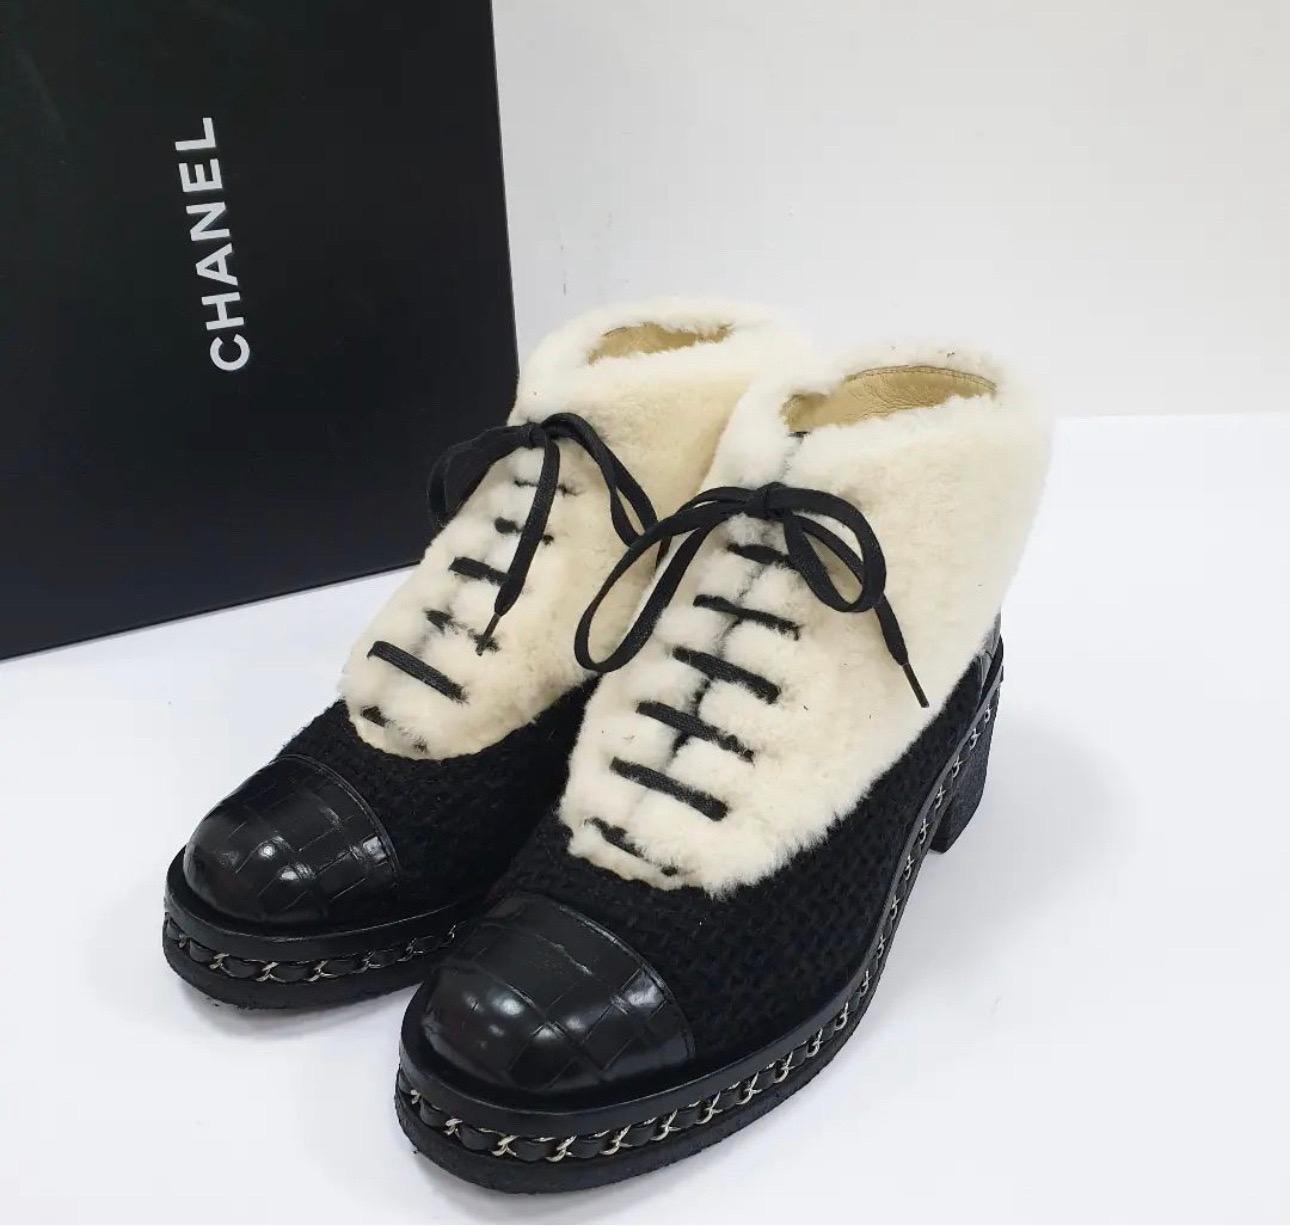 Chanel ankle boots in off-white rubbit fur, black bouclé and quilted leather heel featuring a black croco embossed leather tip. 
Rubber sole with silver-tone signature chain detail around.
Lined in off-white leather. 
Sz.38
Very good condition.
No